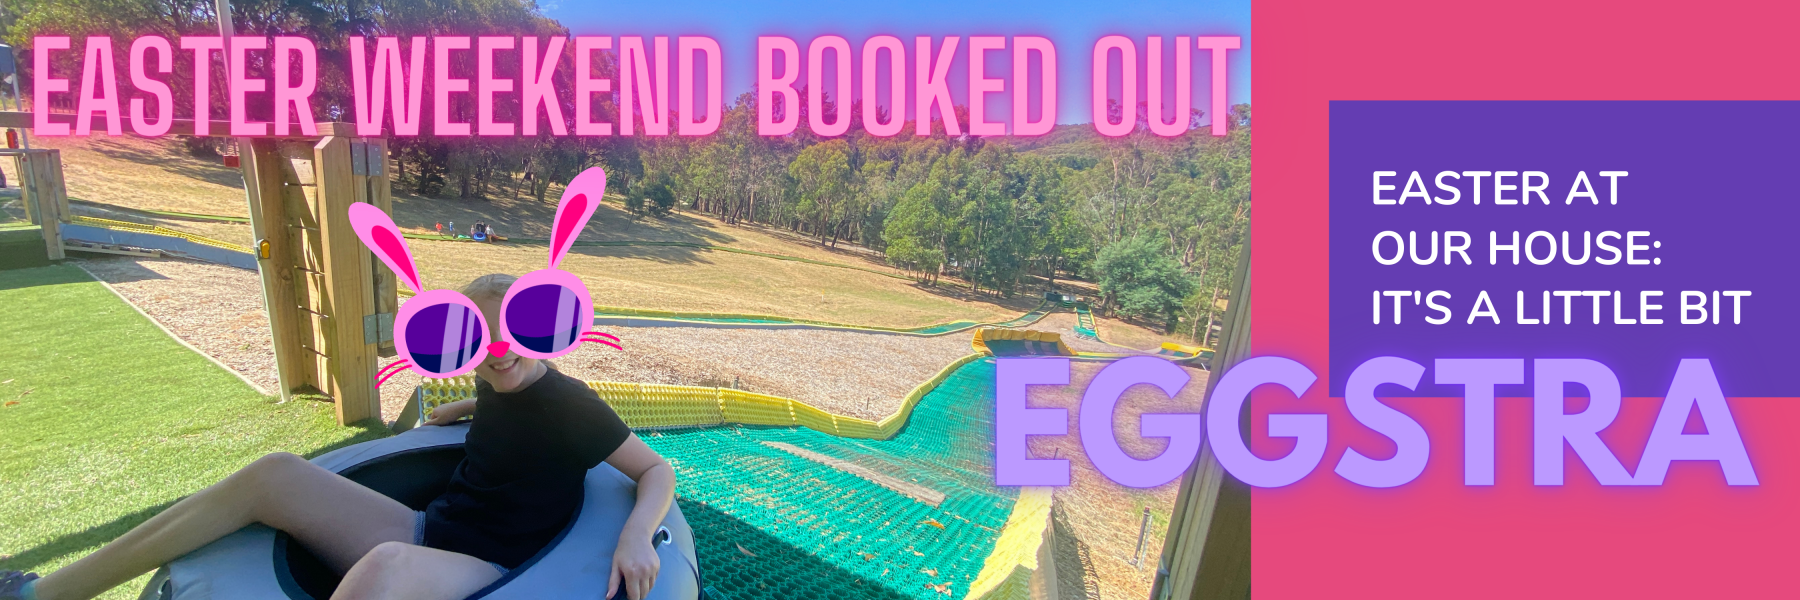 Easter Booked Out Header